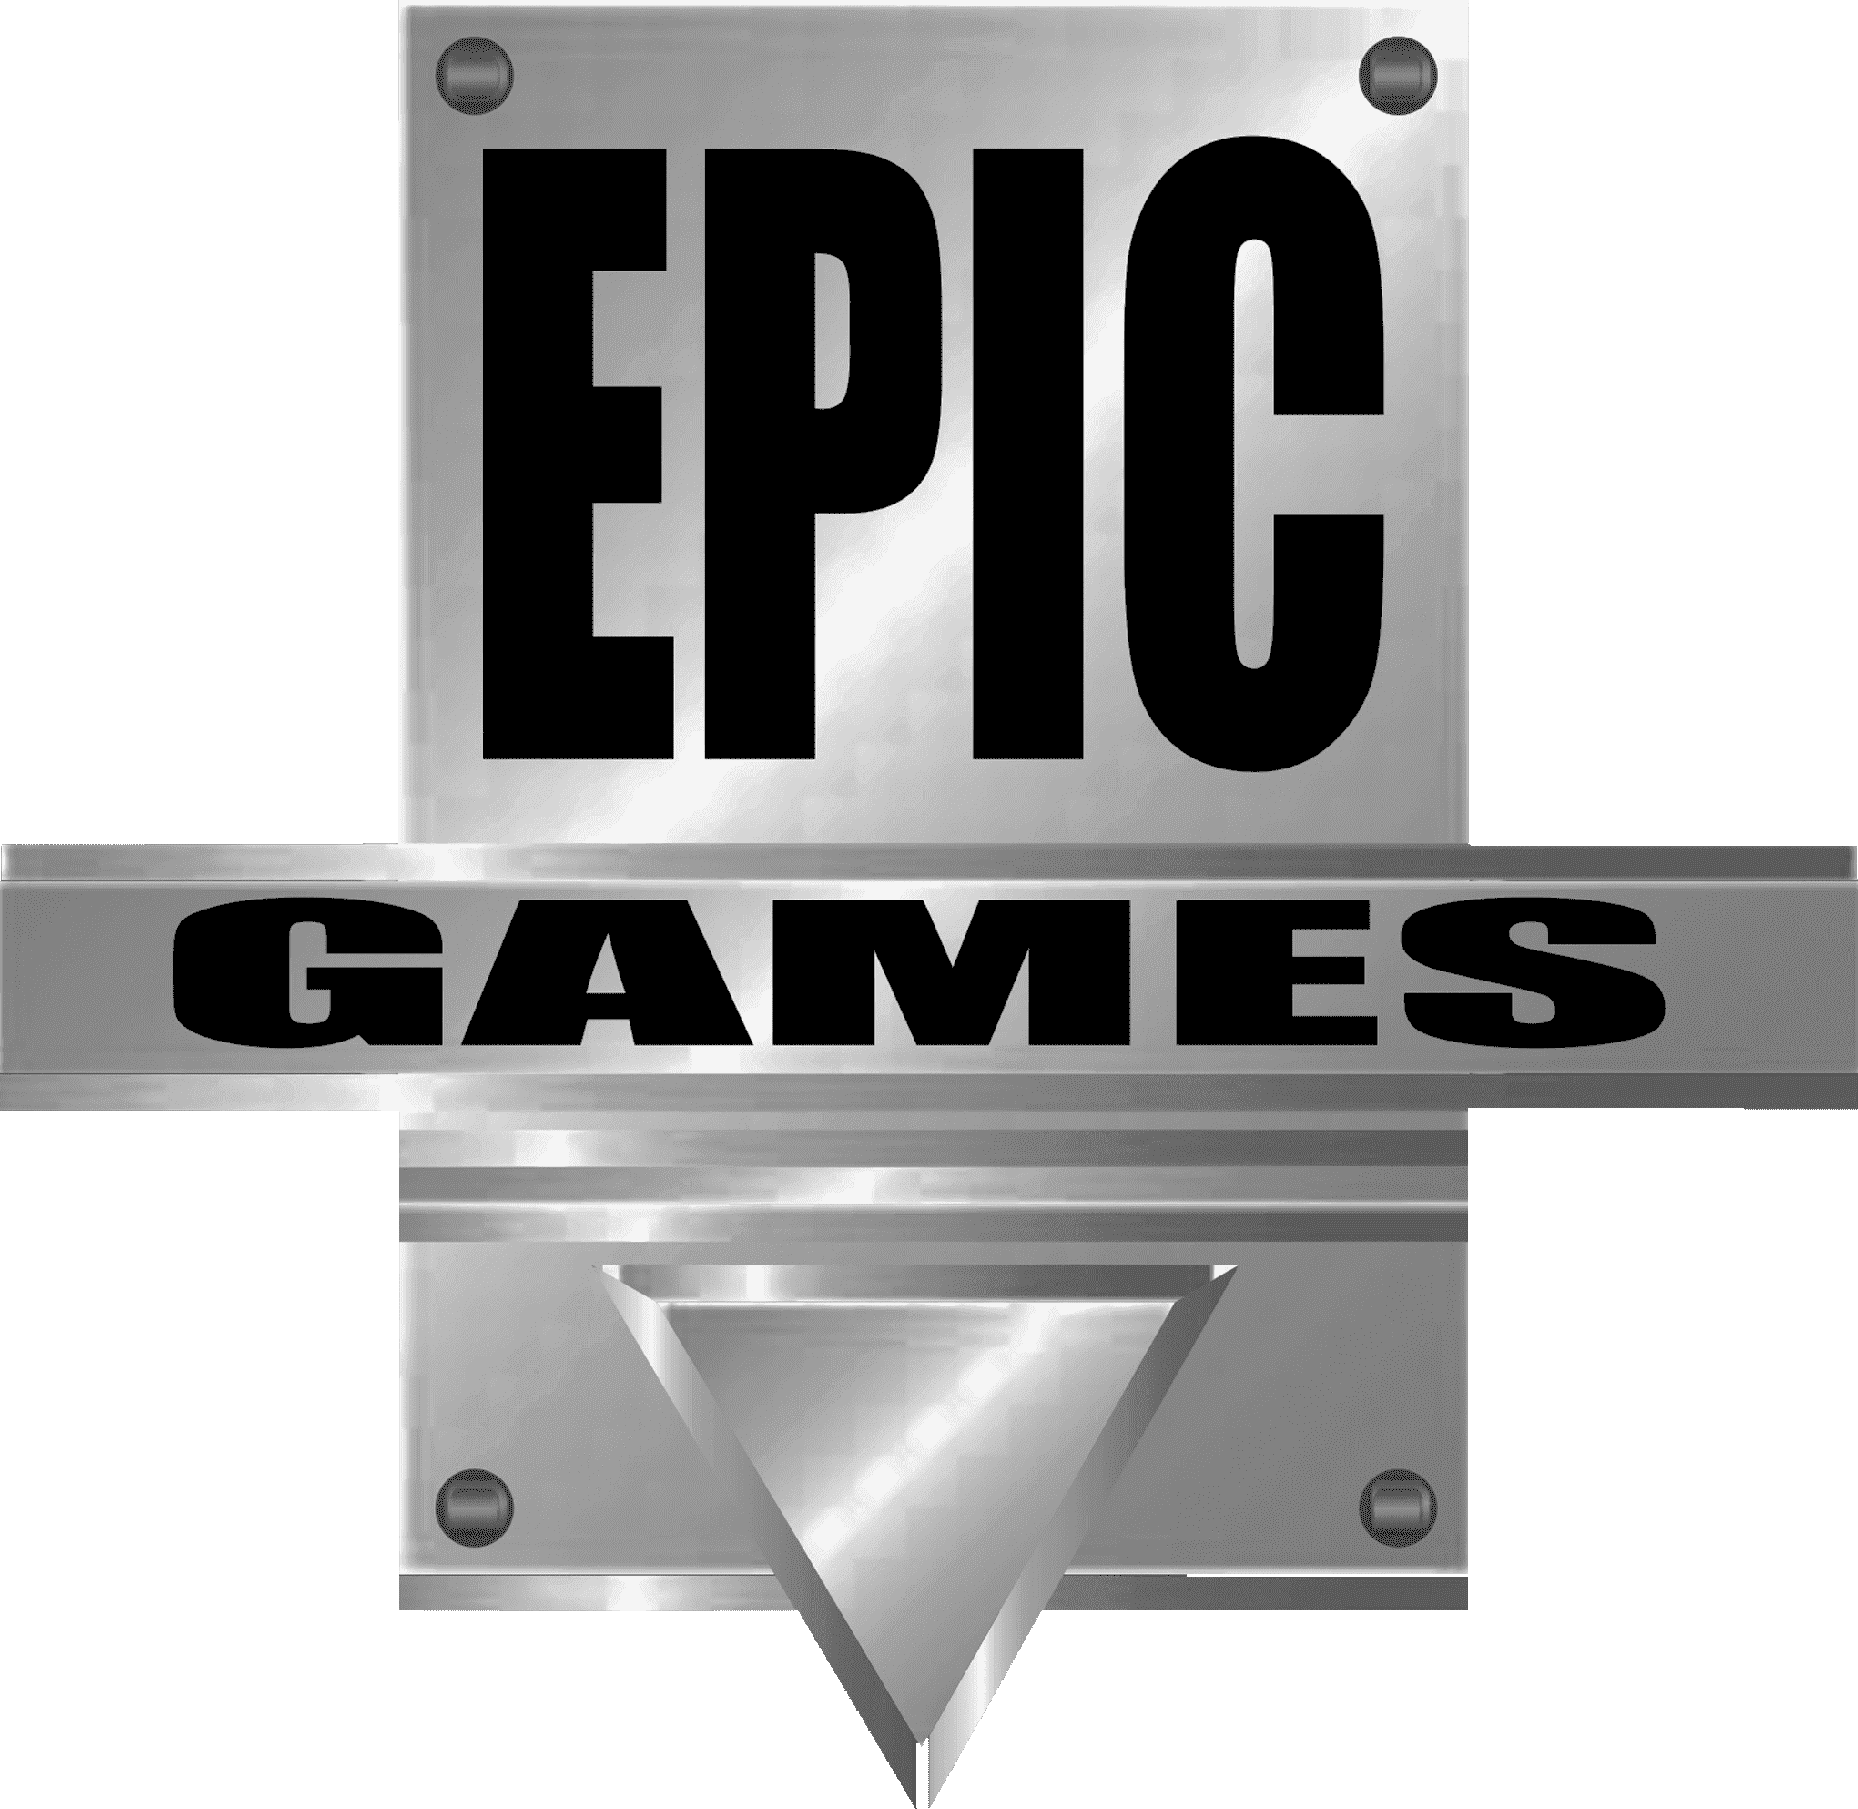 Grid for Epic Games Store (Program) by Near717